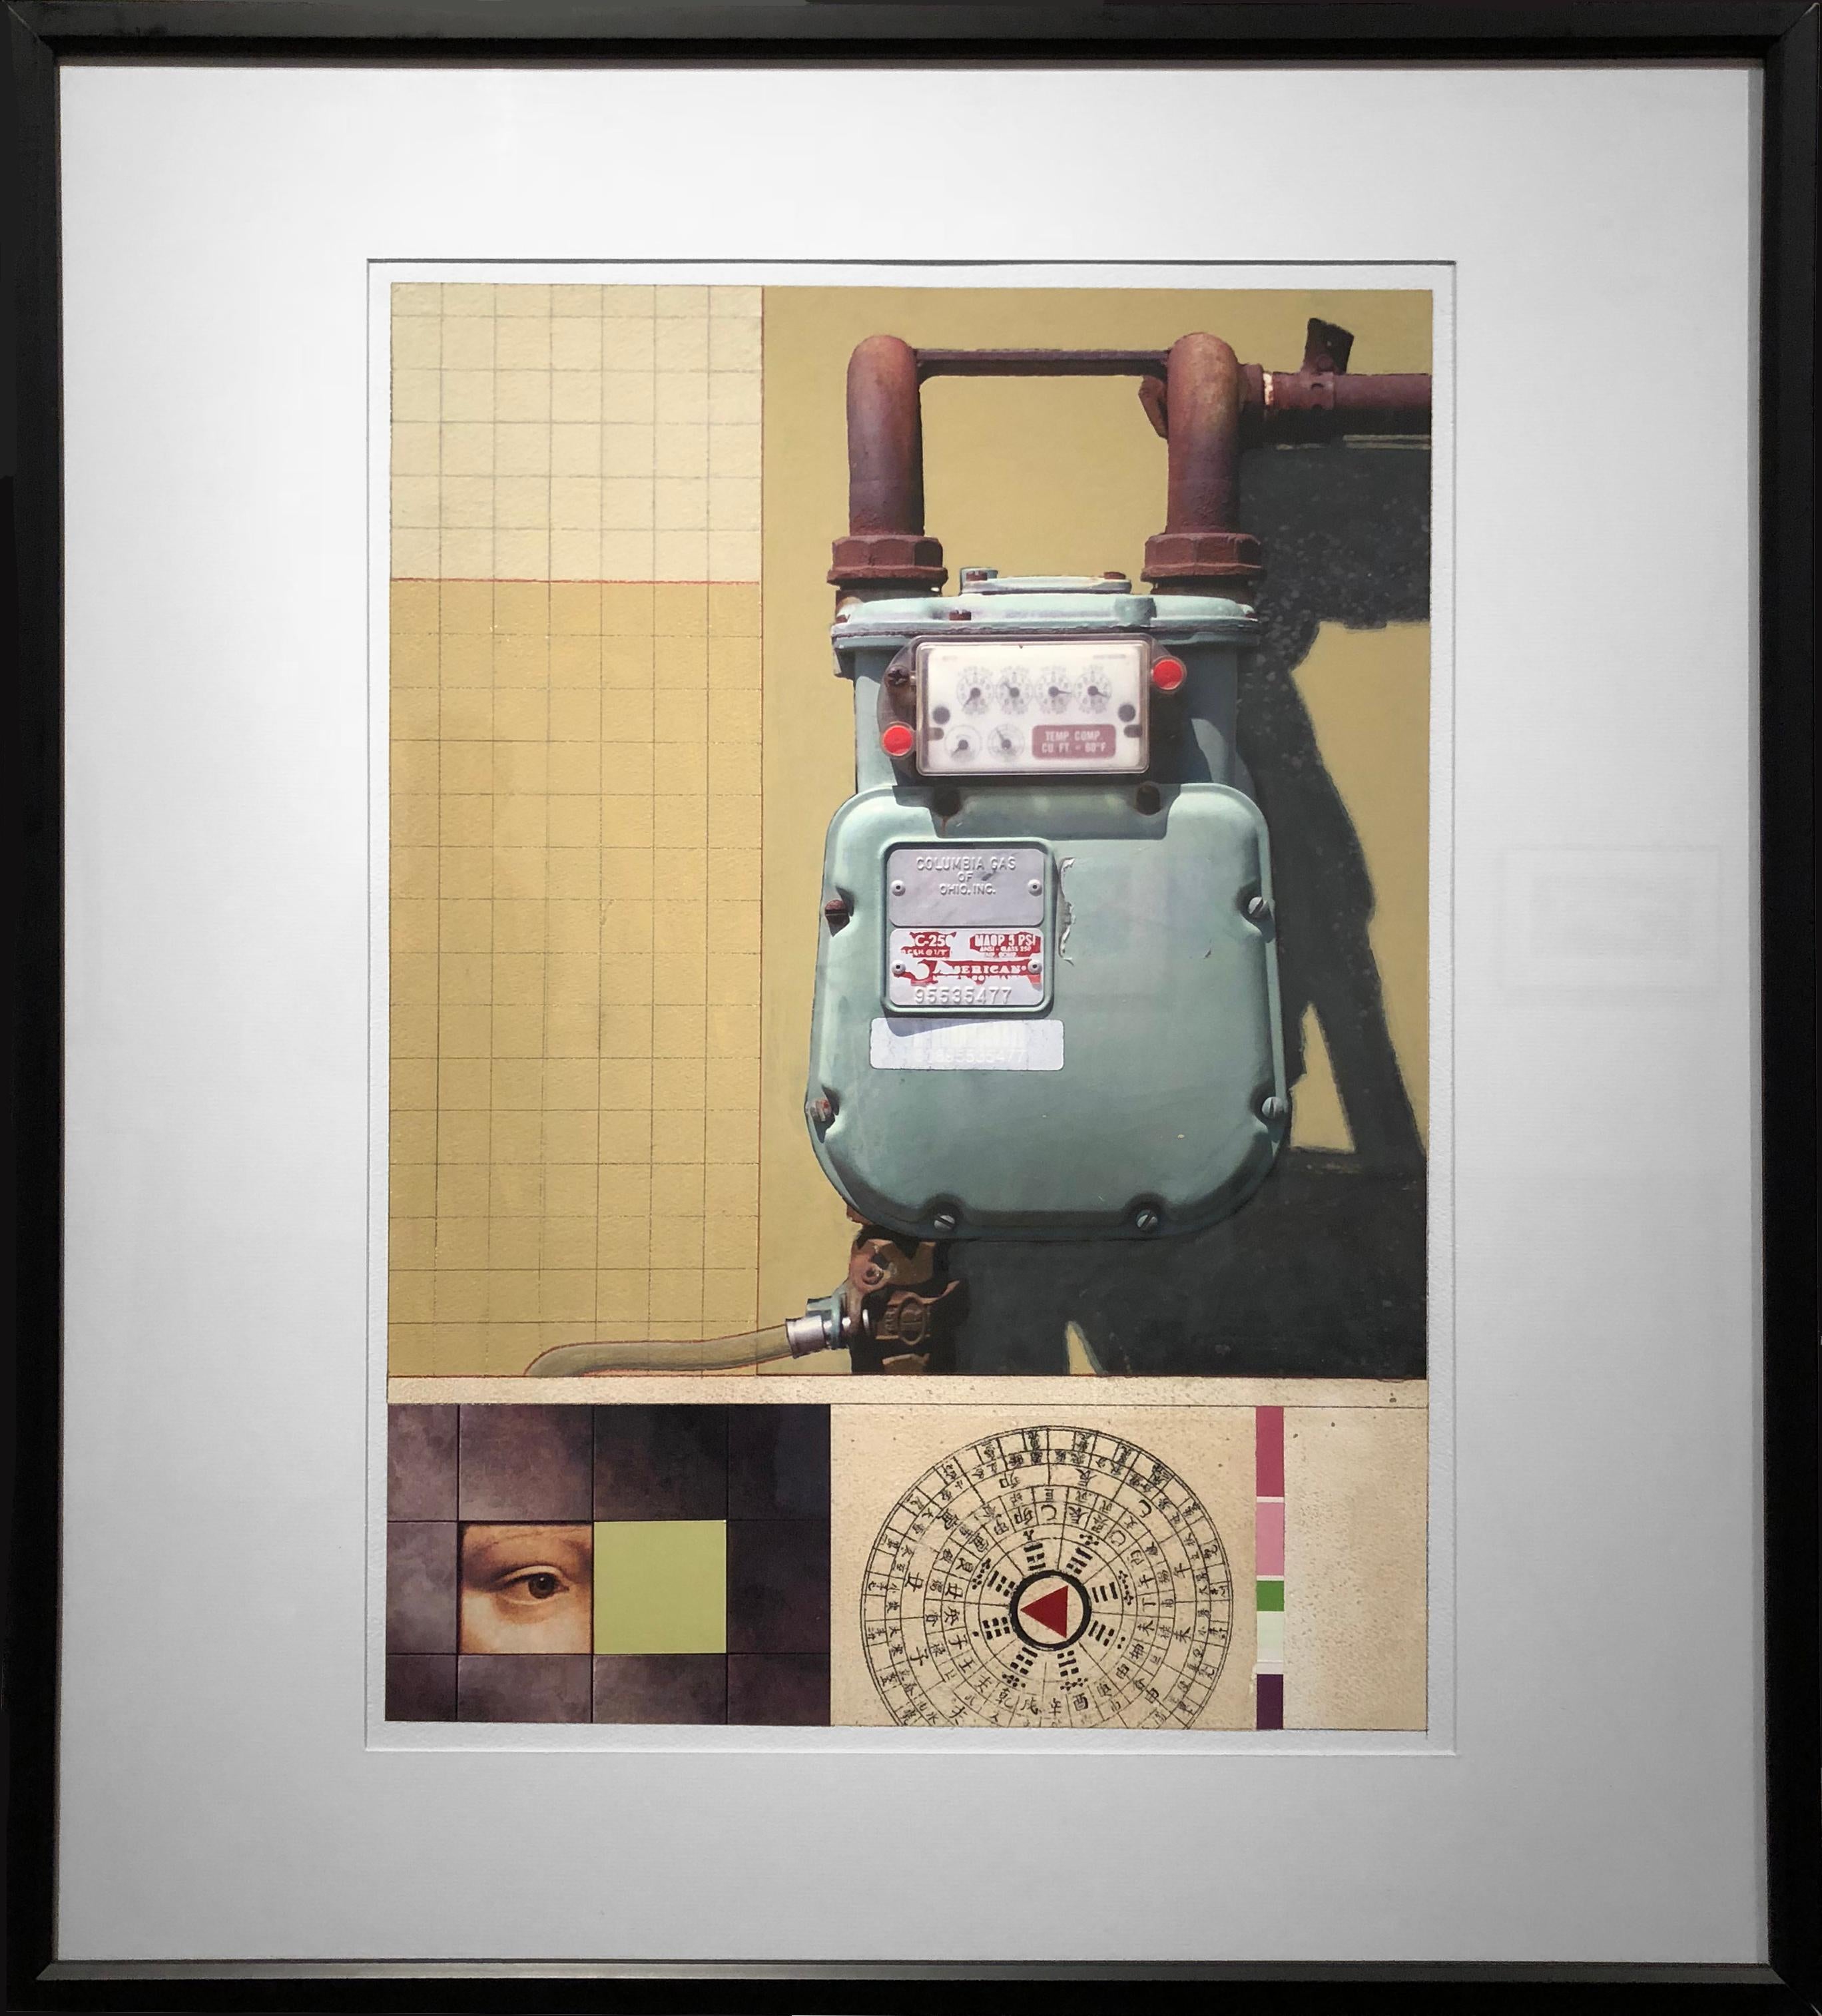 Lee enhances industrial spaces in Fung Shui Meter. A mixed media work on paper, the artist combines a gas meter and a Fung Shui compass, used to determine the correct location for optimal spatial harmony, in order to create a Fung Shui Meter. The